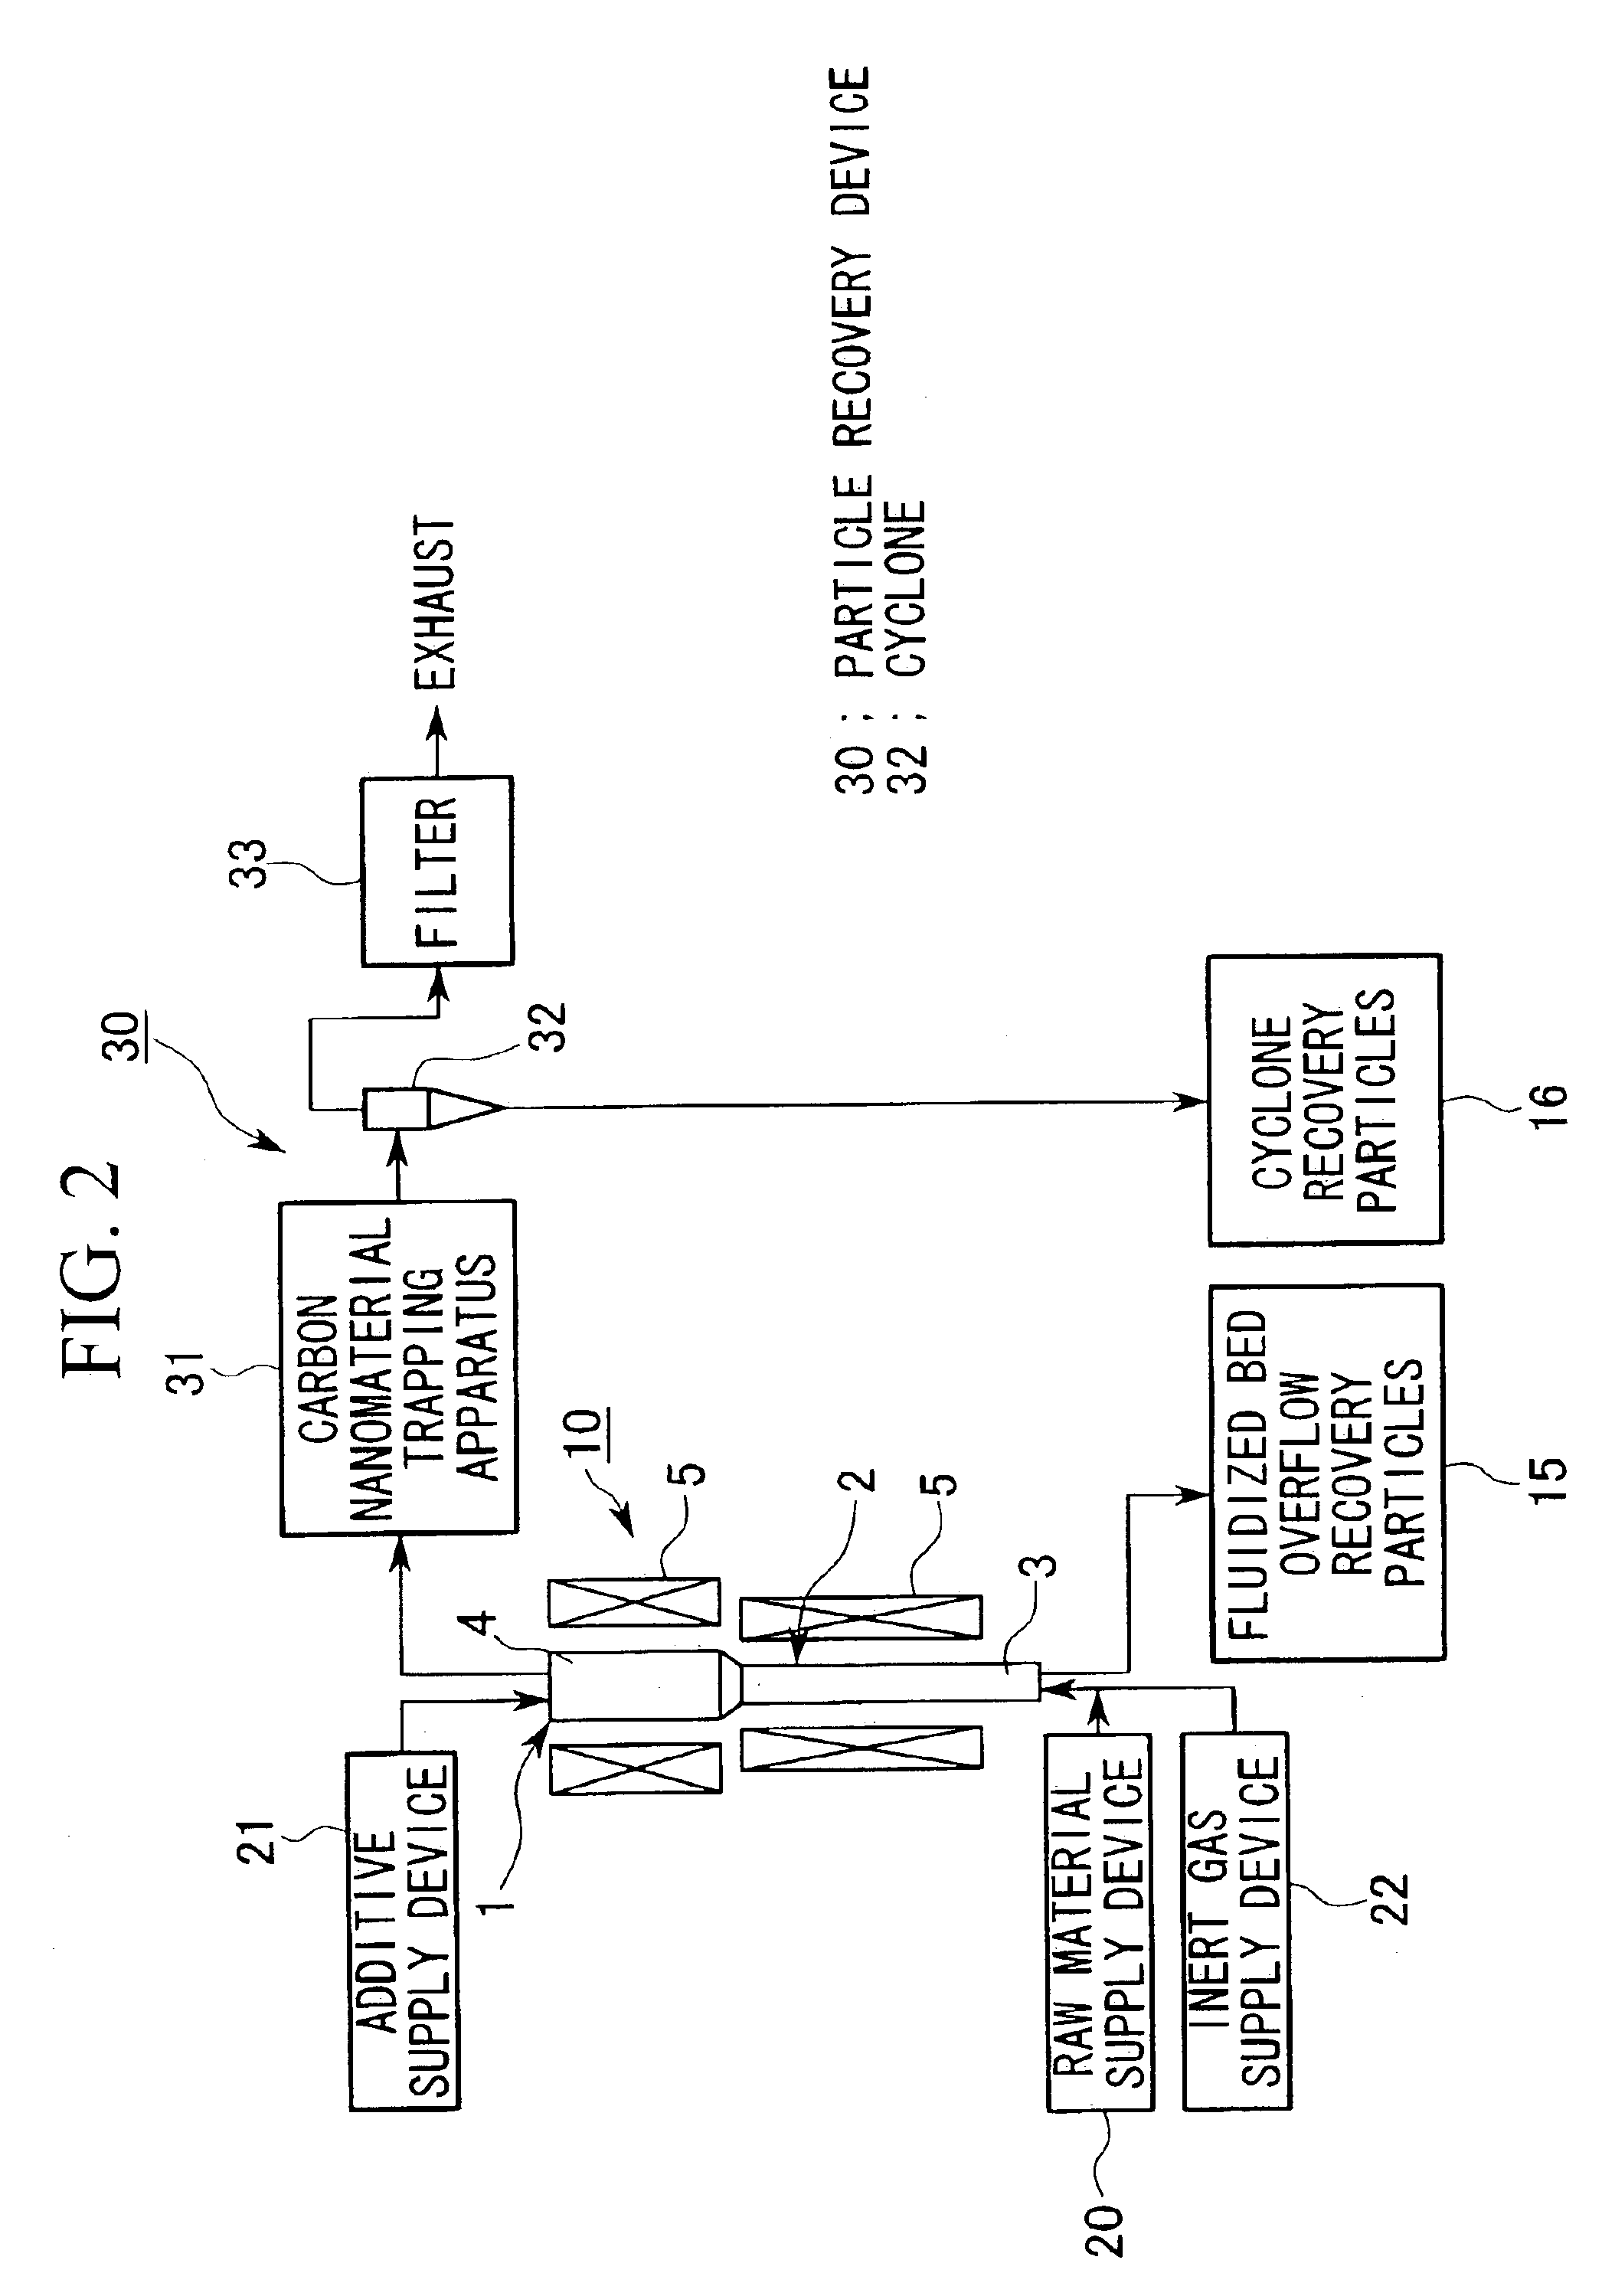 Manufacturing method for a carbon nanomaterial, a manufacturing apparatus for a carbon nanomaterial, and manufacturing facility for a carbon nanomaterial